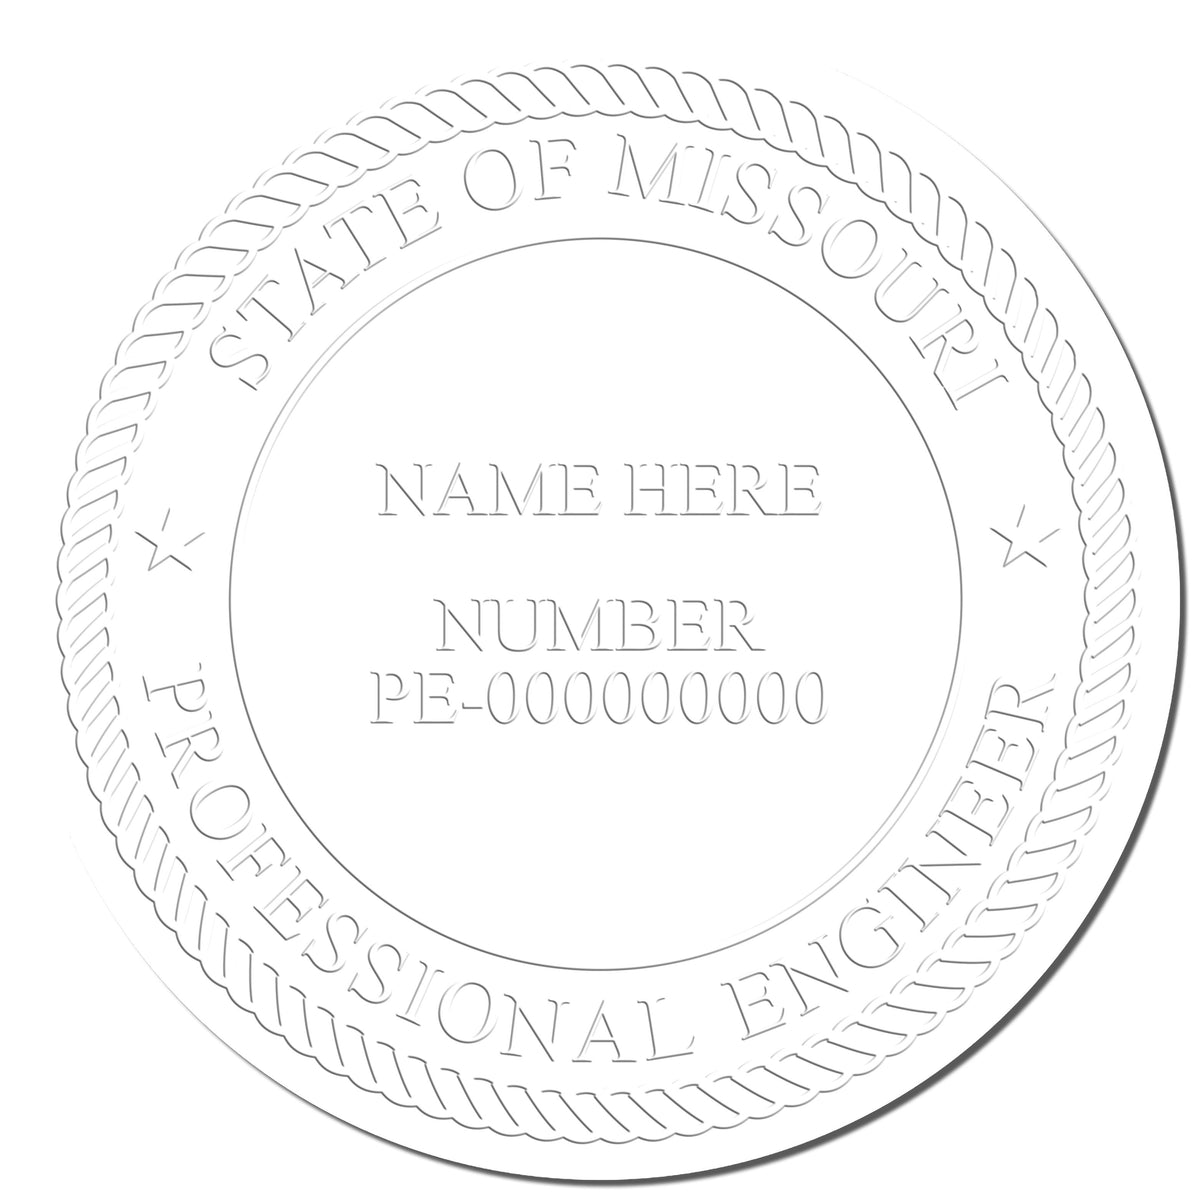 The Soft Missouri Professional Engineer Seal stamp impression comes to life with a crisp, detailed photo on paper - showcasing true professional quality.